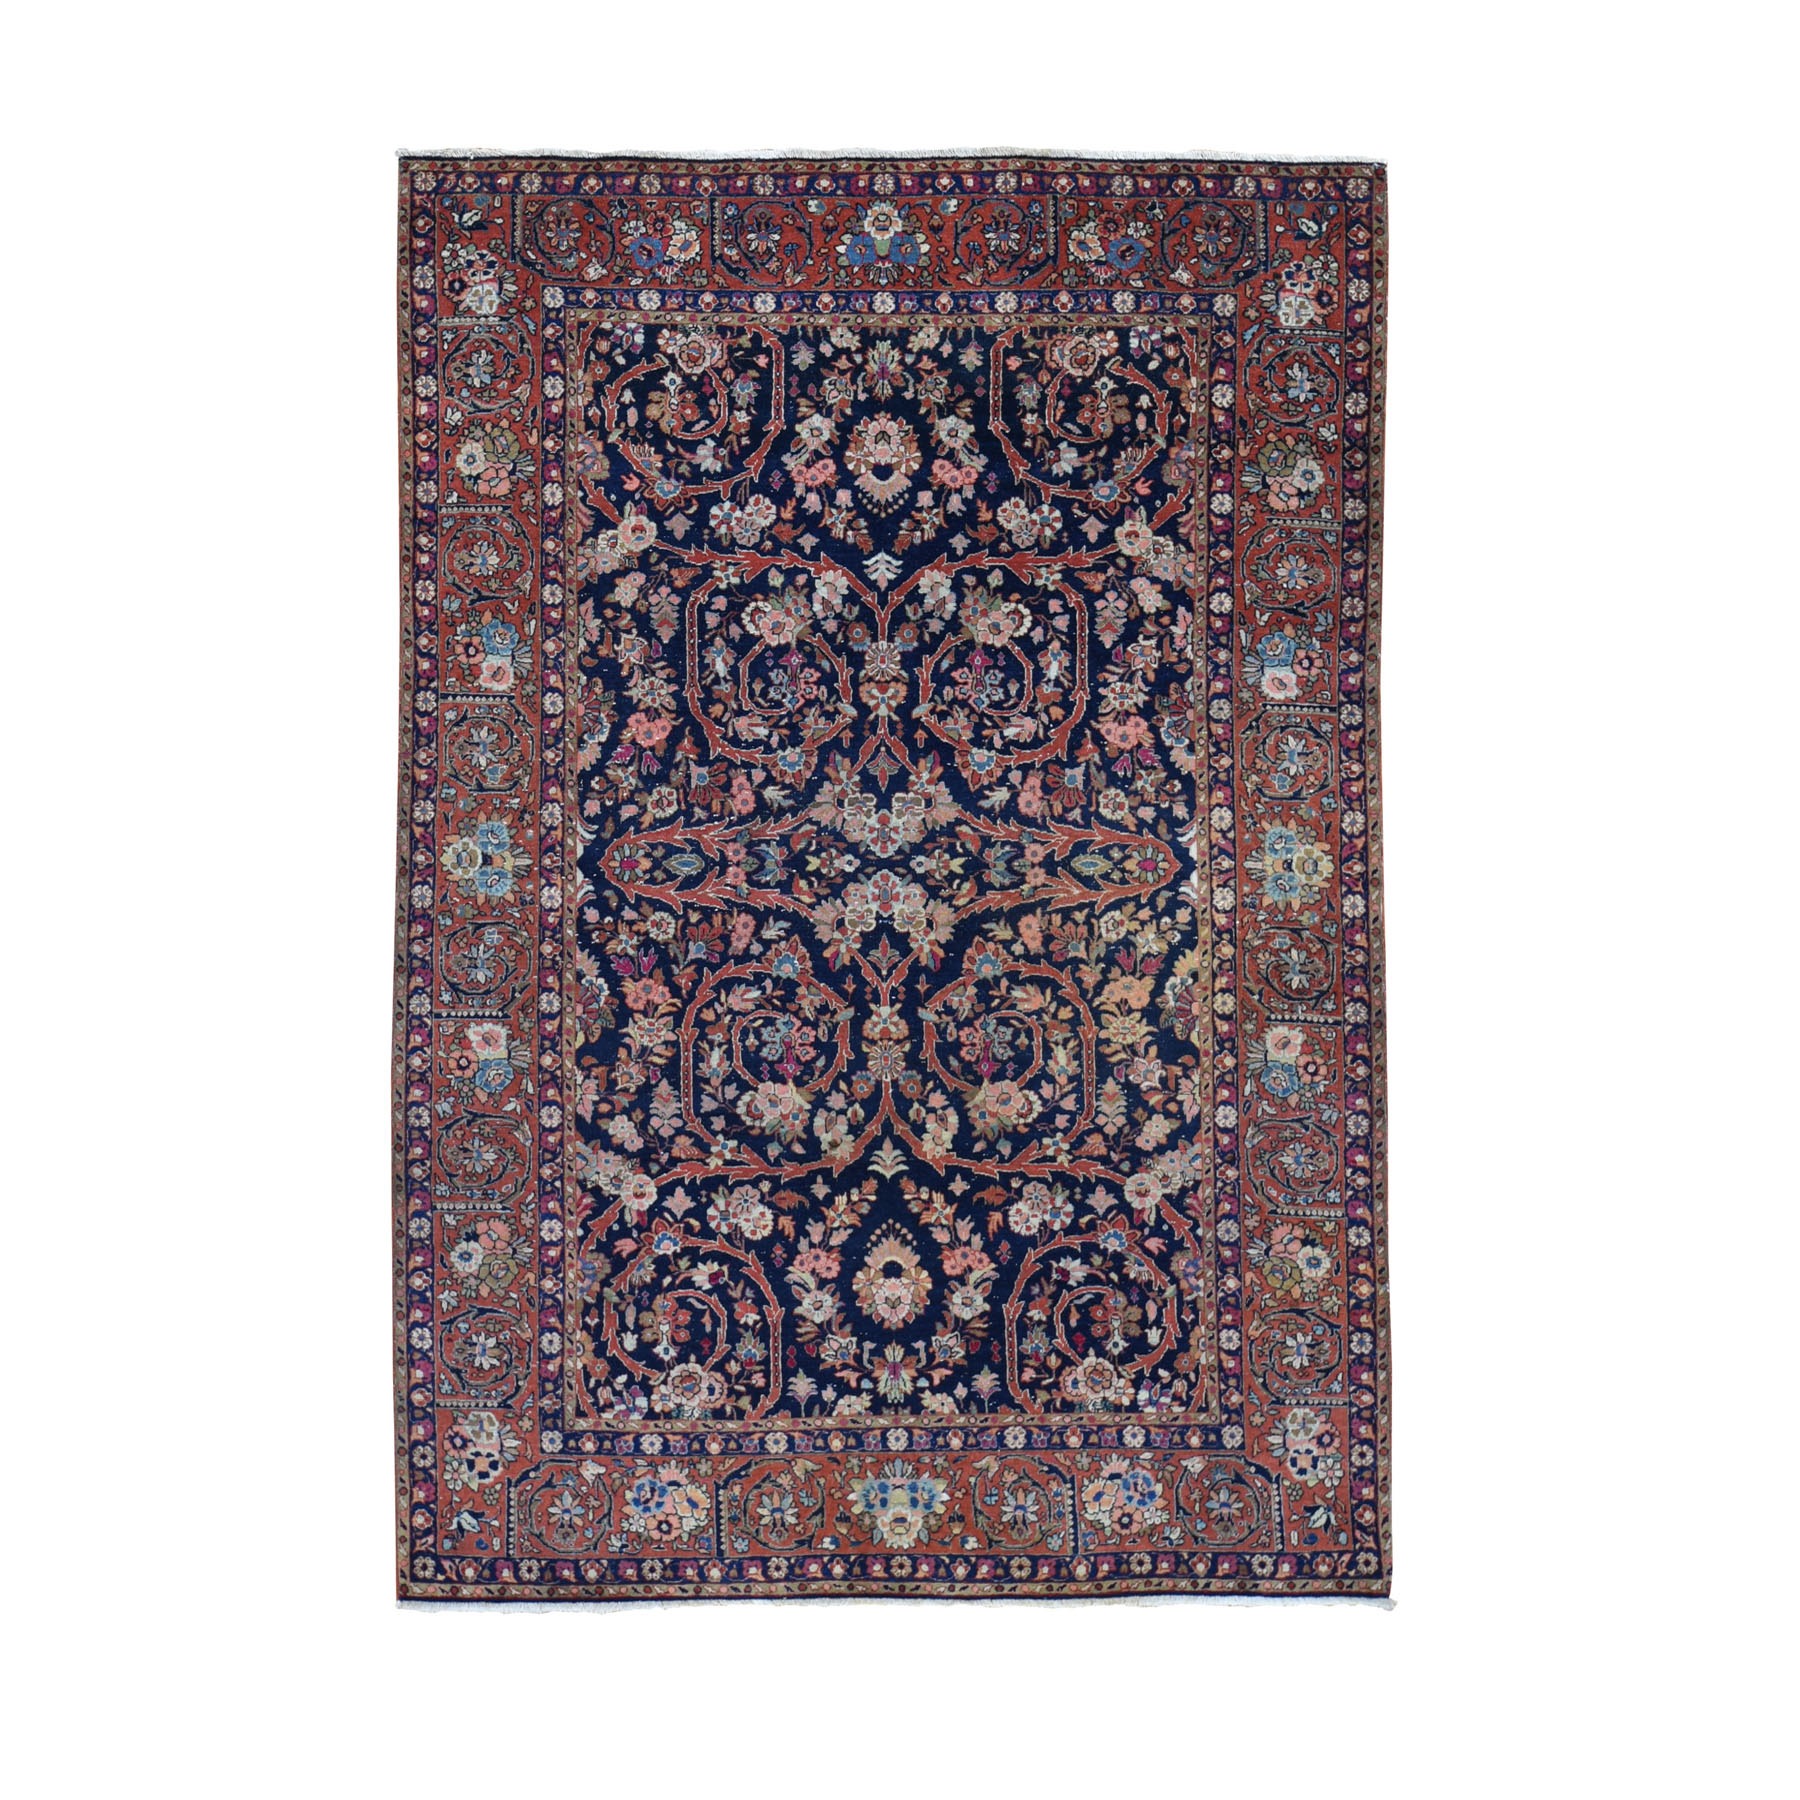 4'7"x6'10" Navy Blue Antique Persian Tabriz Pure Wool Some Wear Hand Woven Oriental Rug 